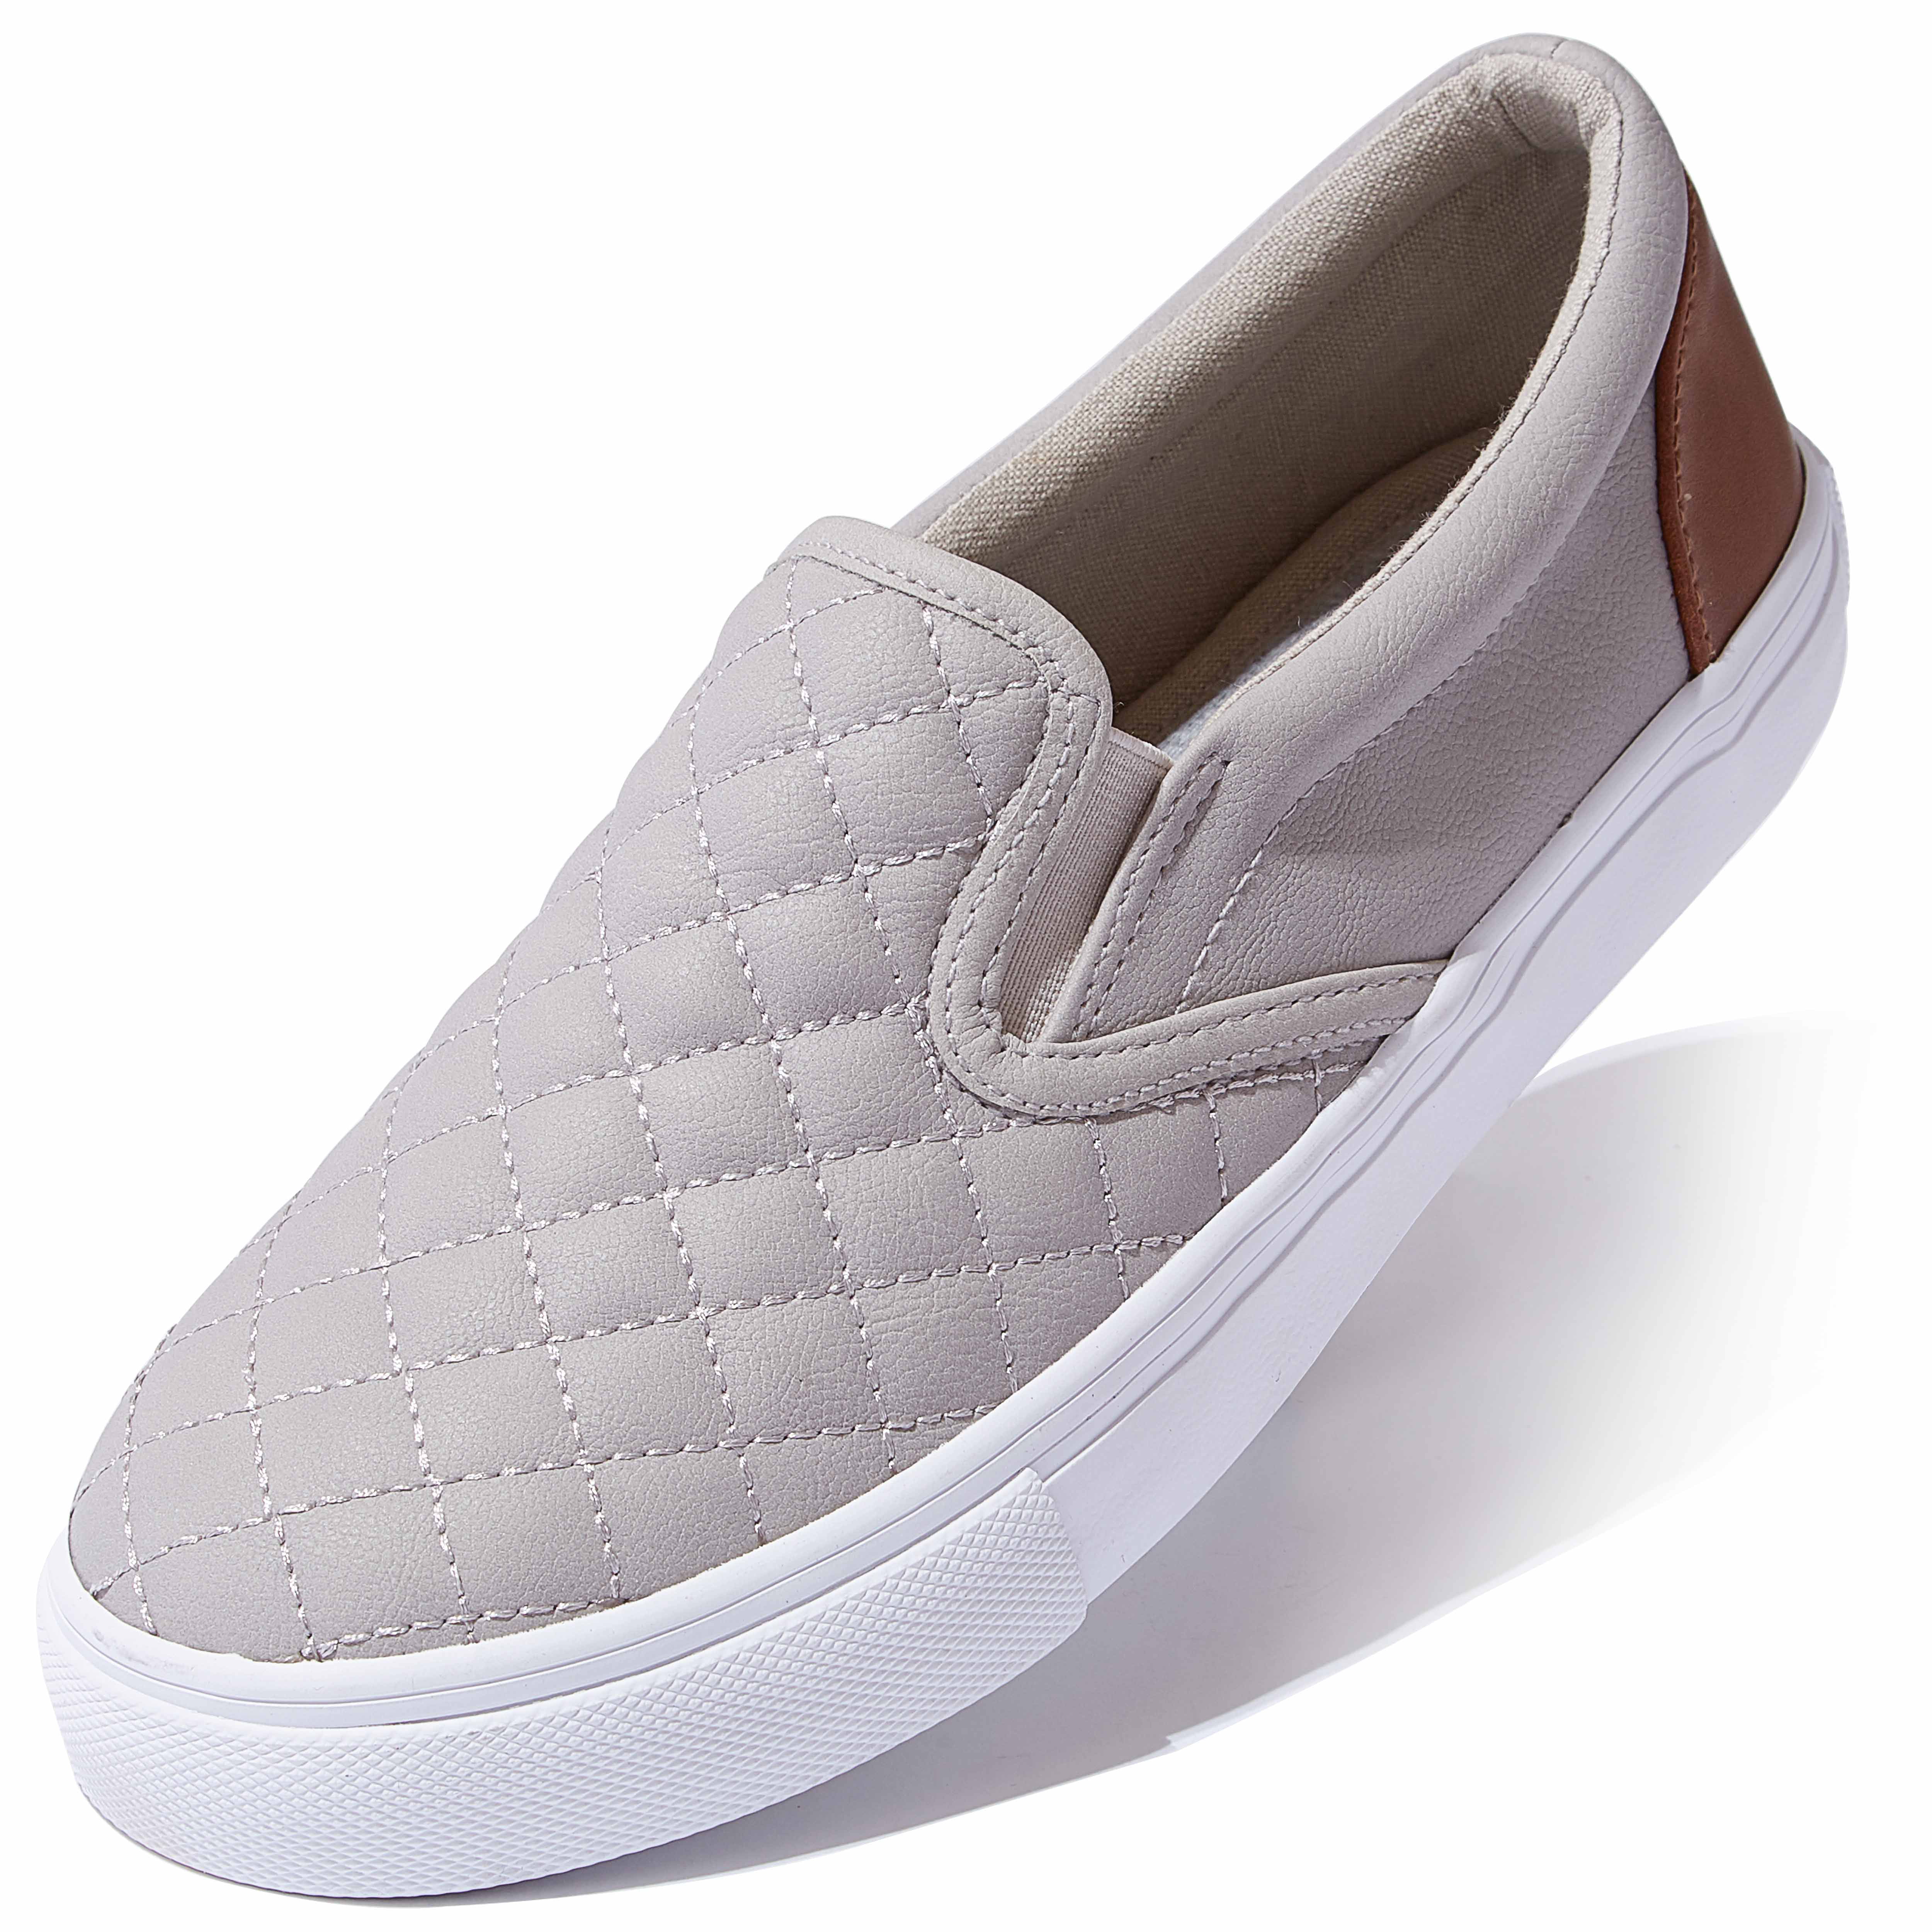 DailyShoes - DailyShoes Quilted Casual Slip-on Sneakers Warm Soft ...